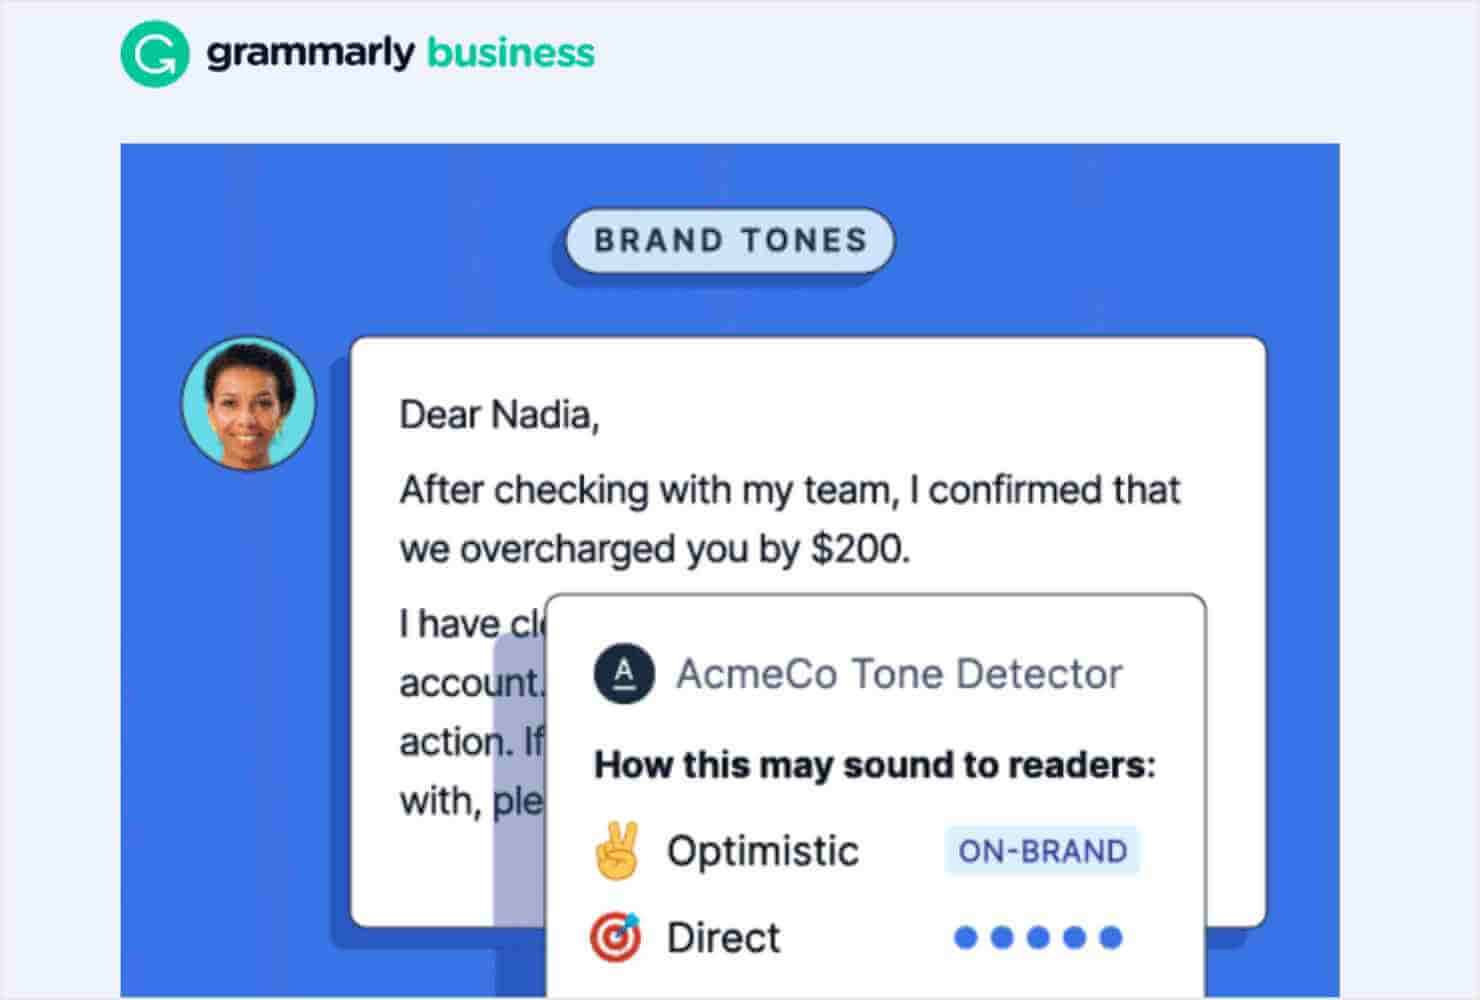 Email with the Grammarly Business logo at the top. Still image from an animation showing Grammarly's Brand Tone detector in action.